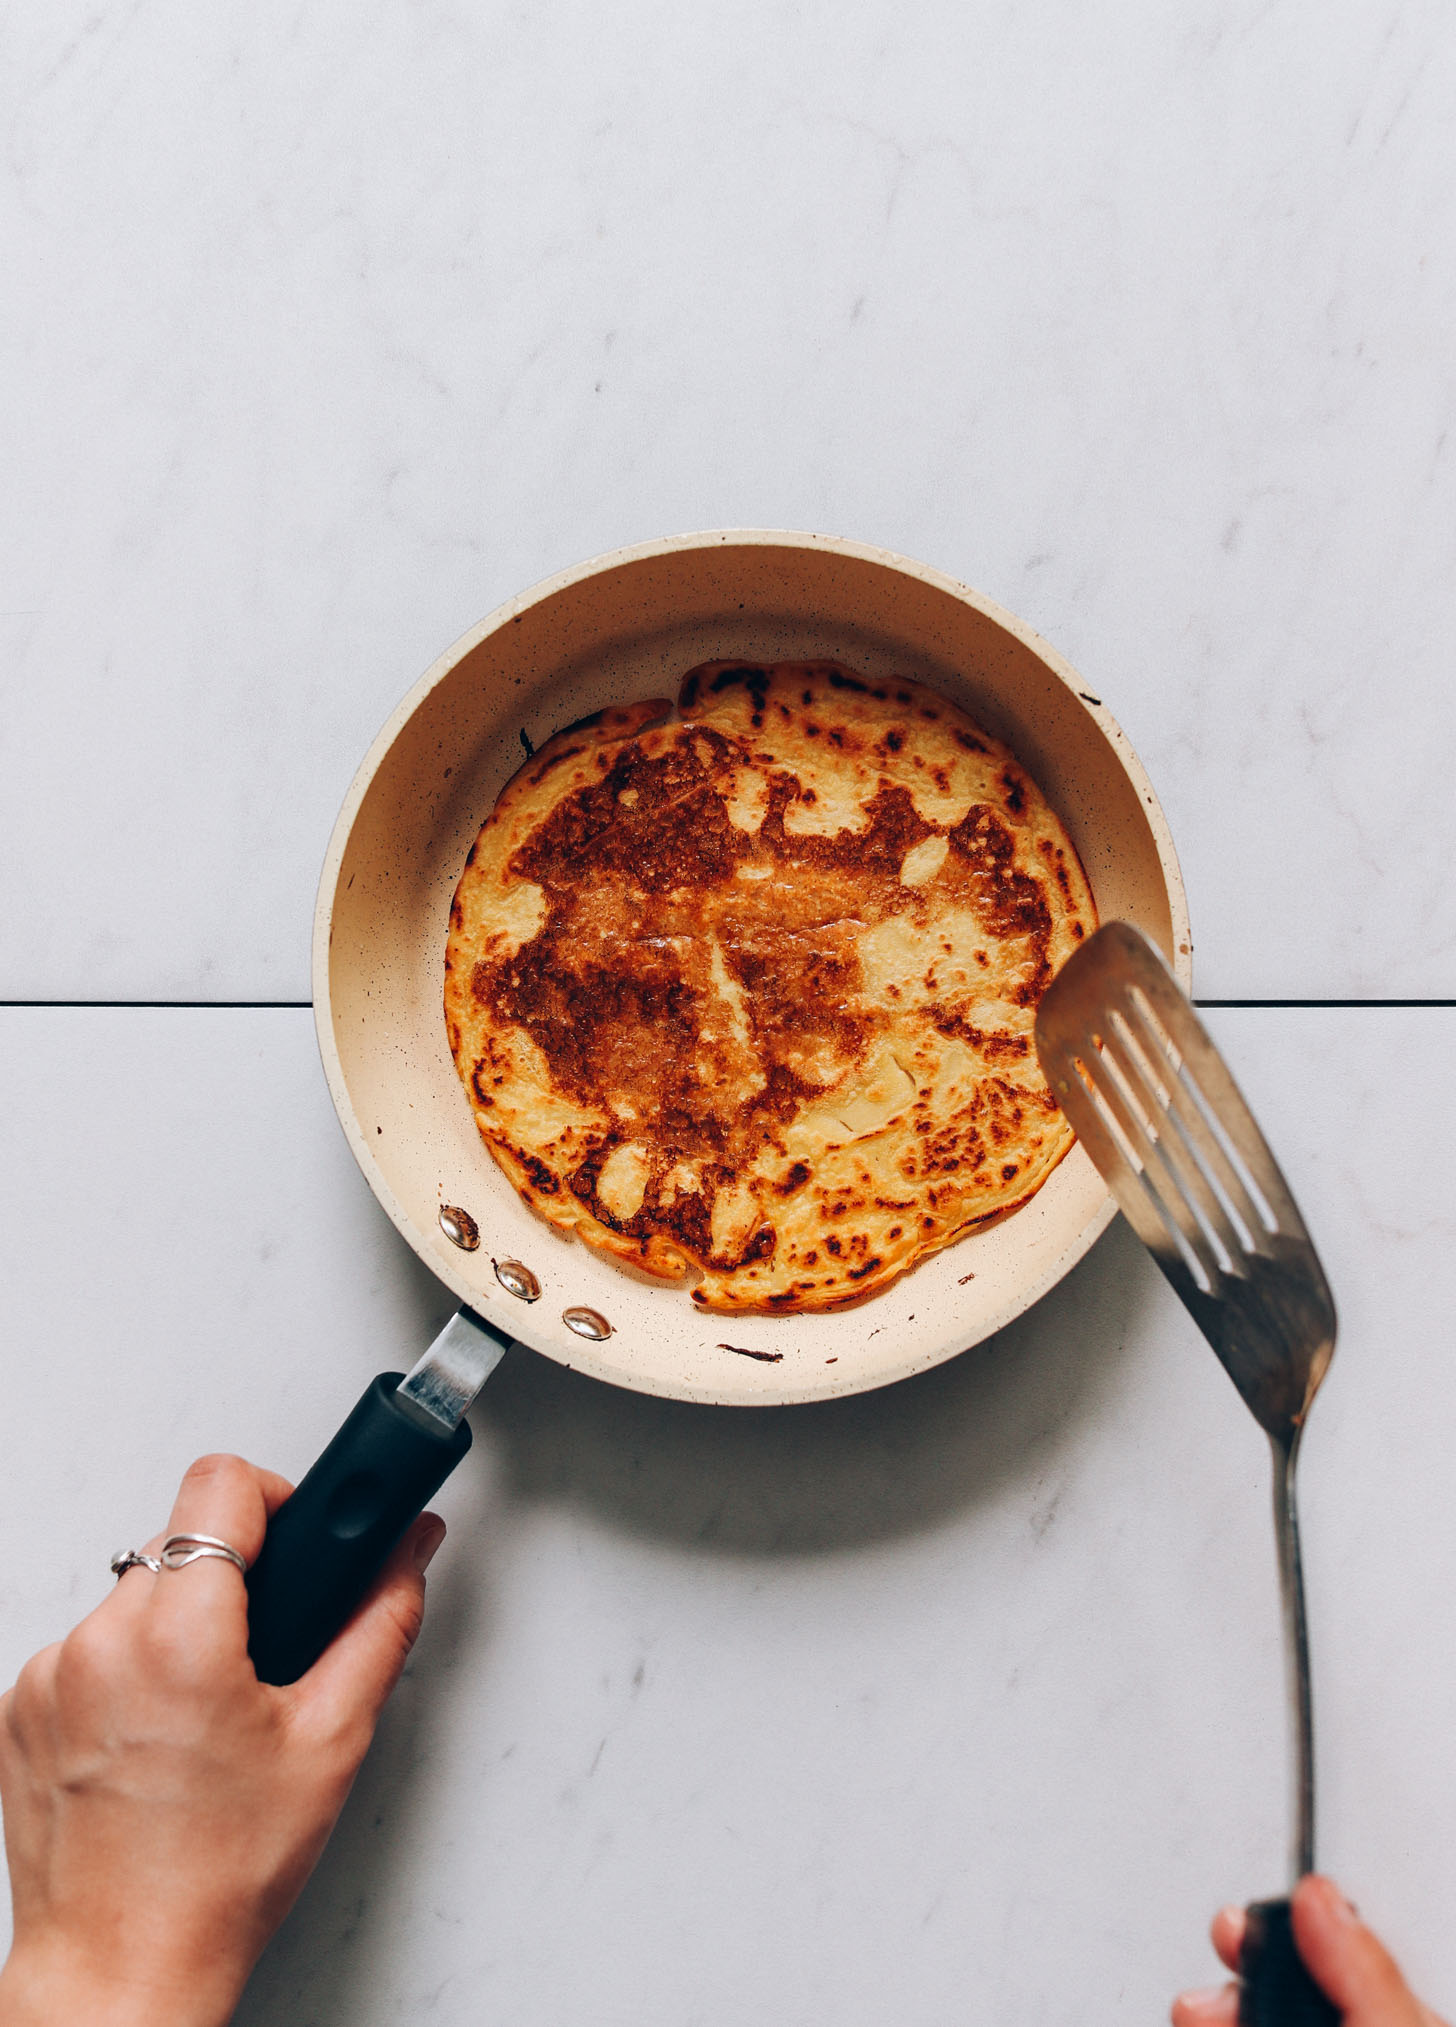 Golden brown chickpea pancake in a pan